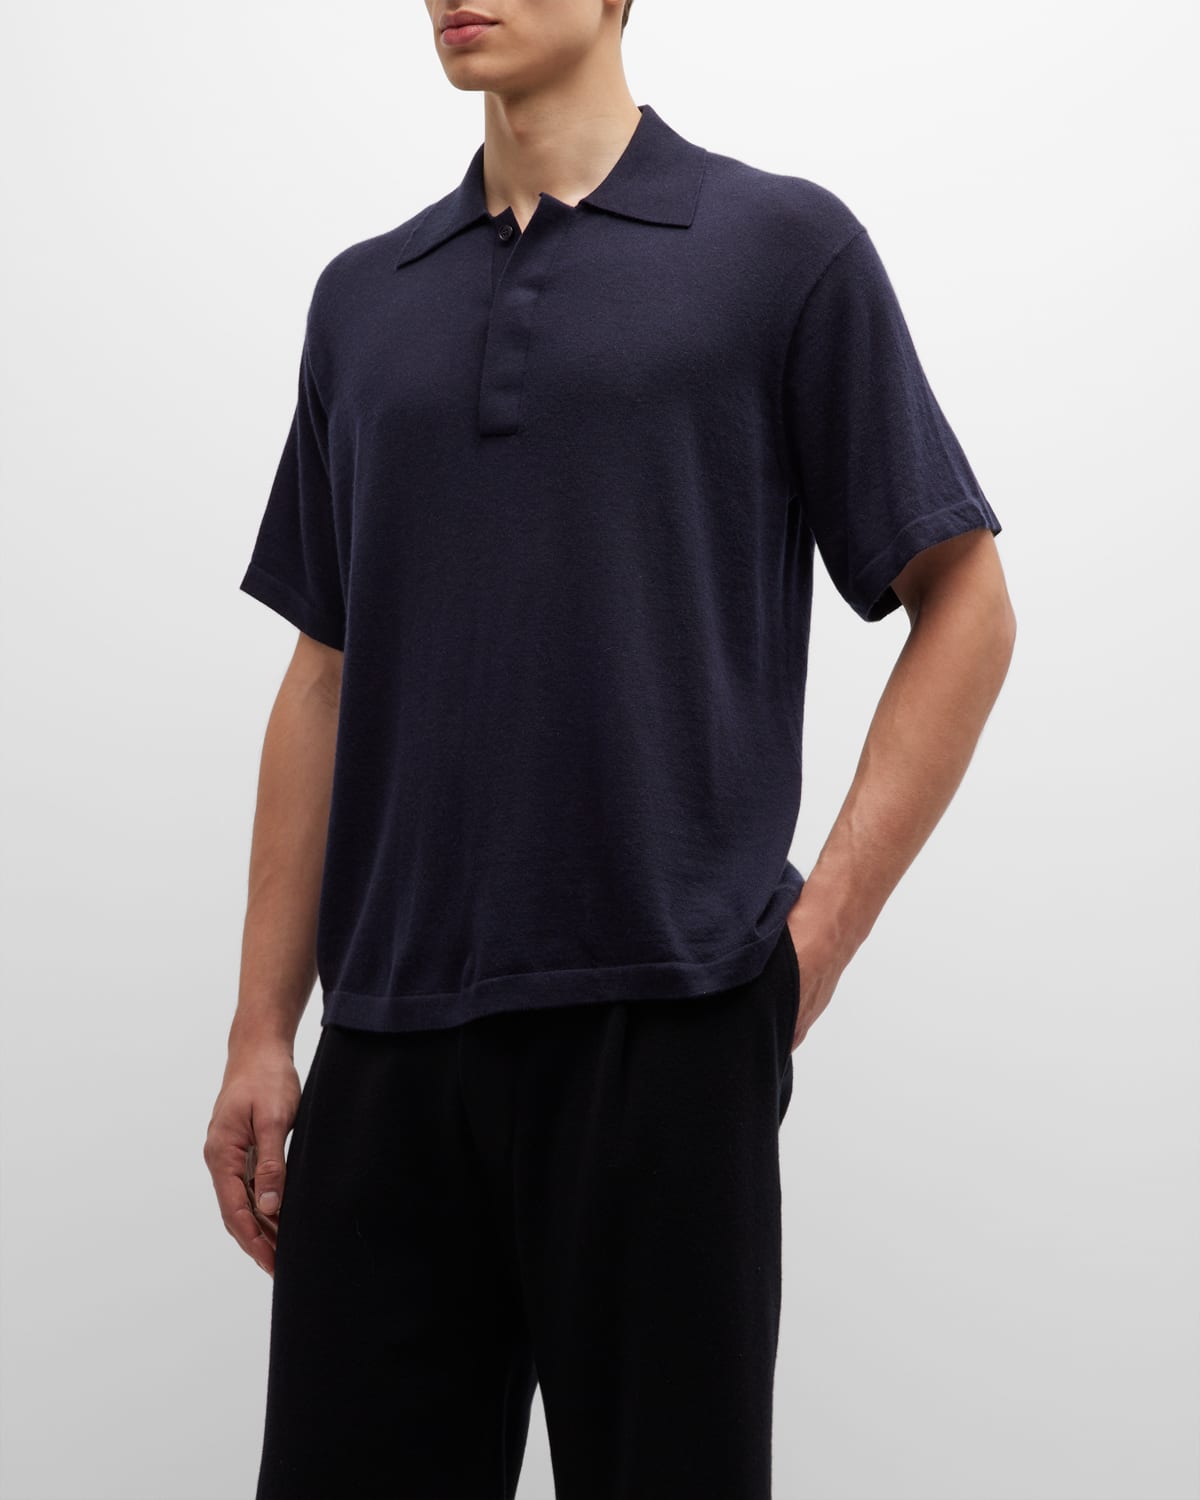 Lisa Yang Men's Charles Cashmere Polo Sweater In Navy